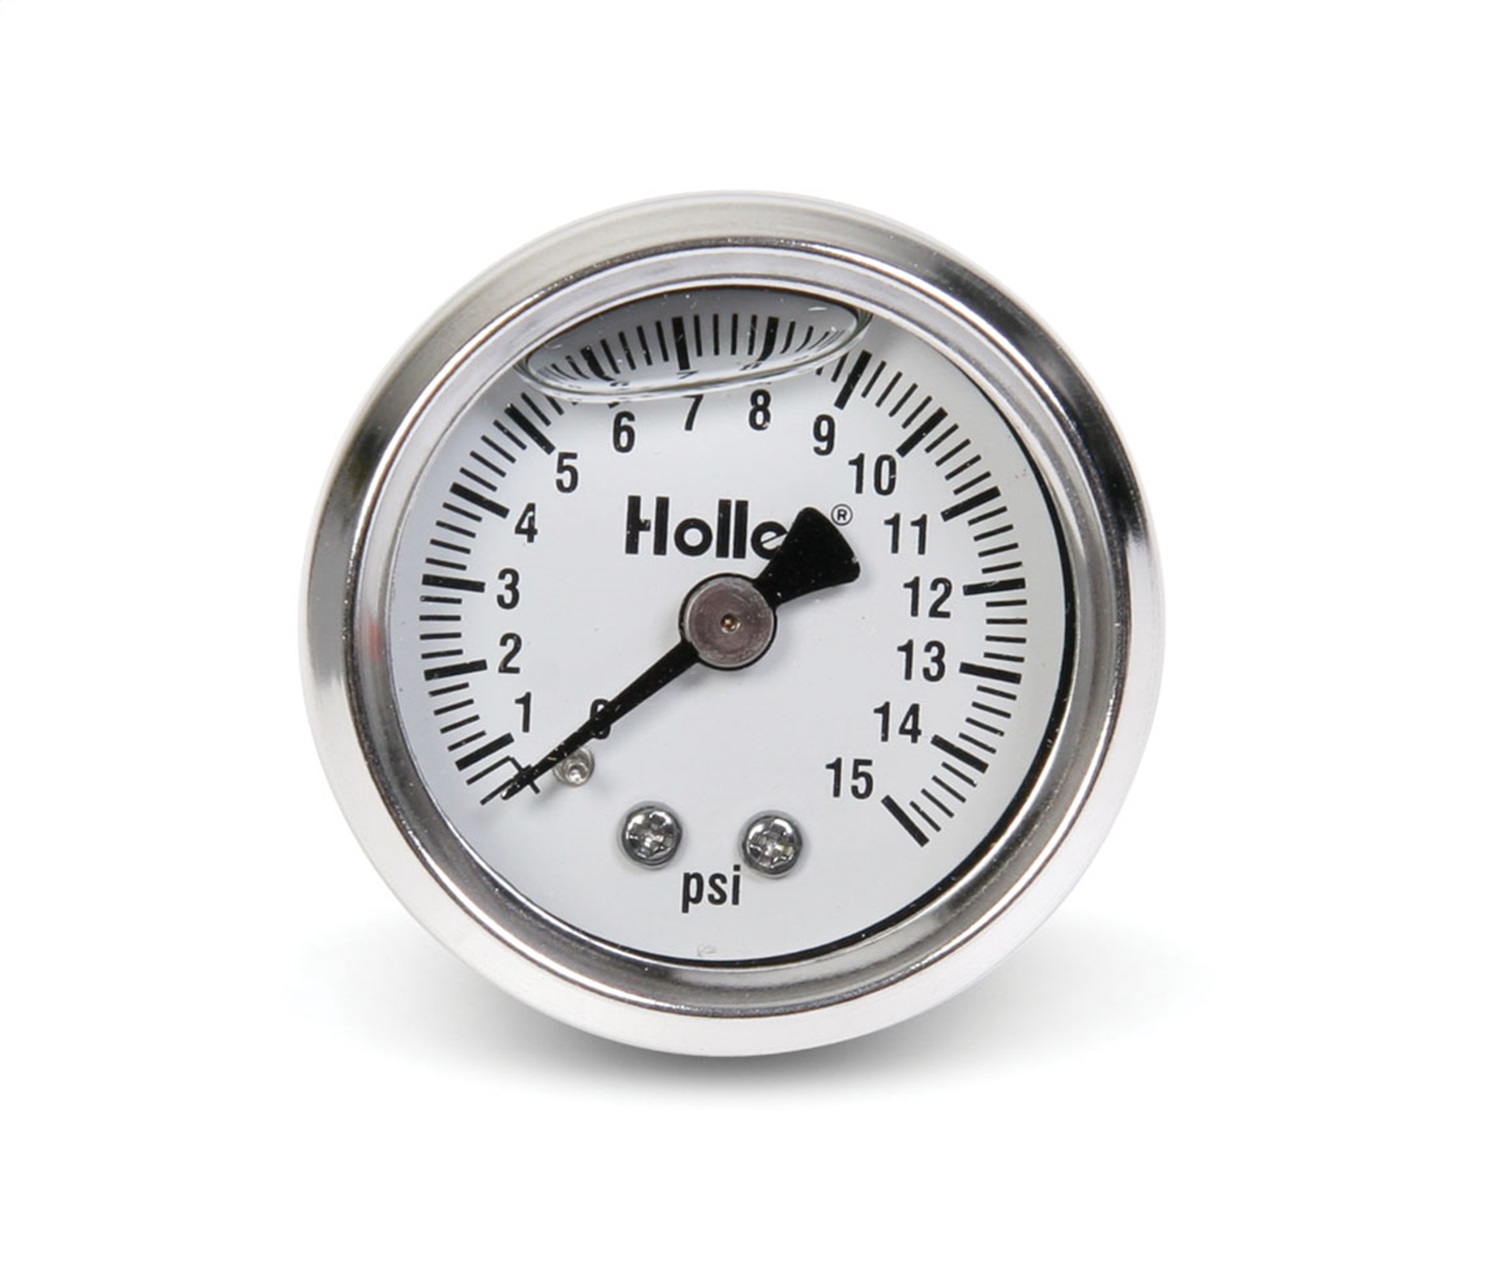 Holley Performance Holley Performance 26-504 Mechanical Fuel Pressure Gauge